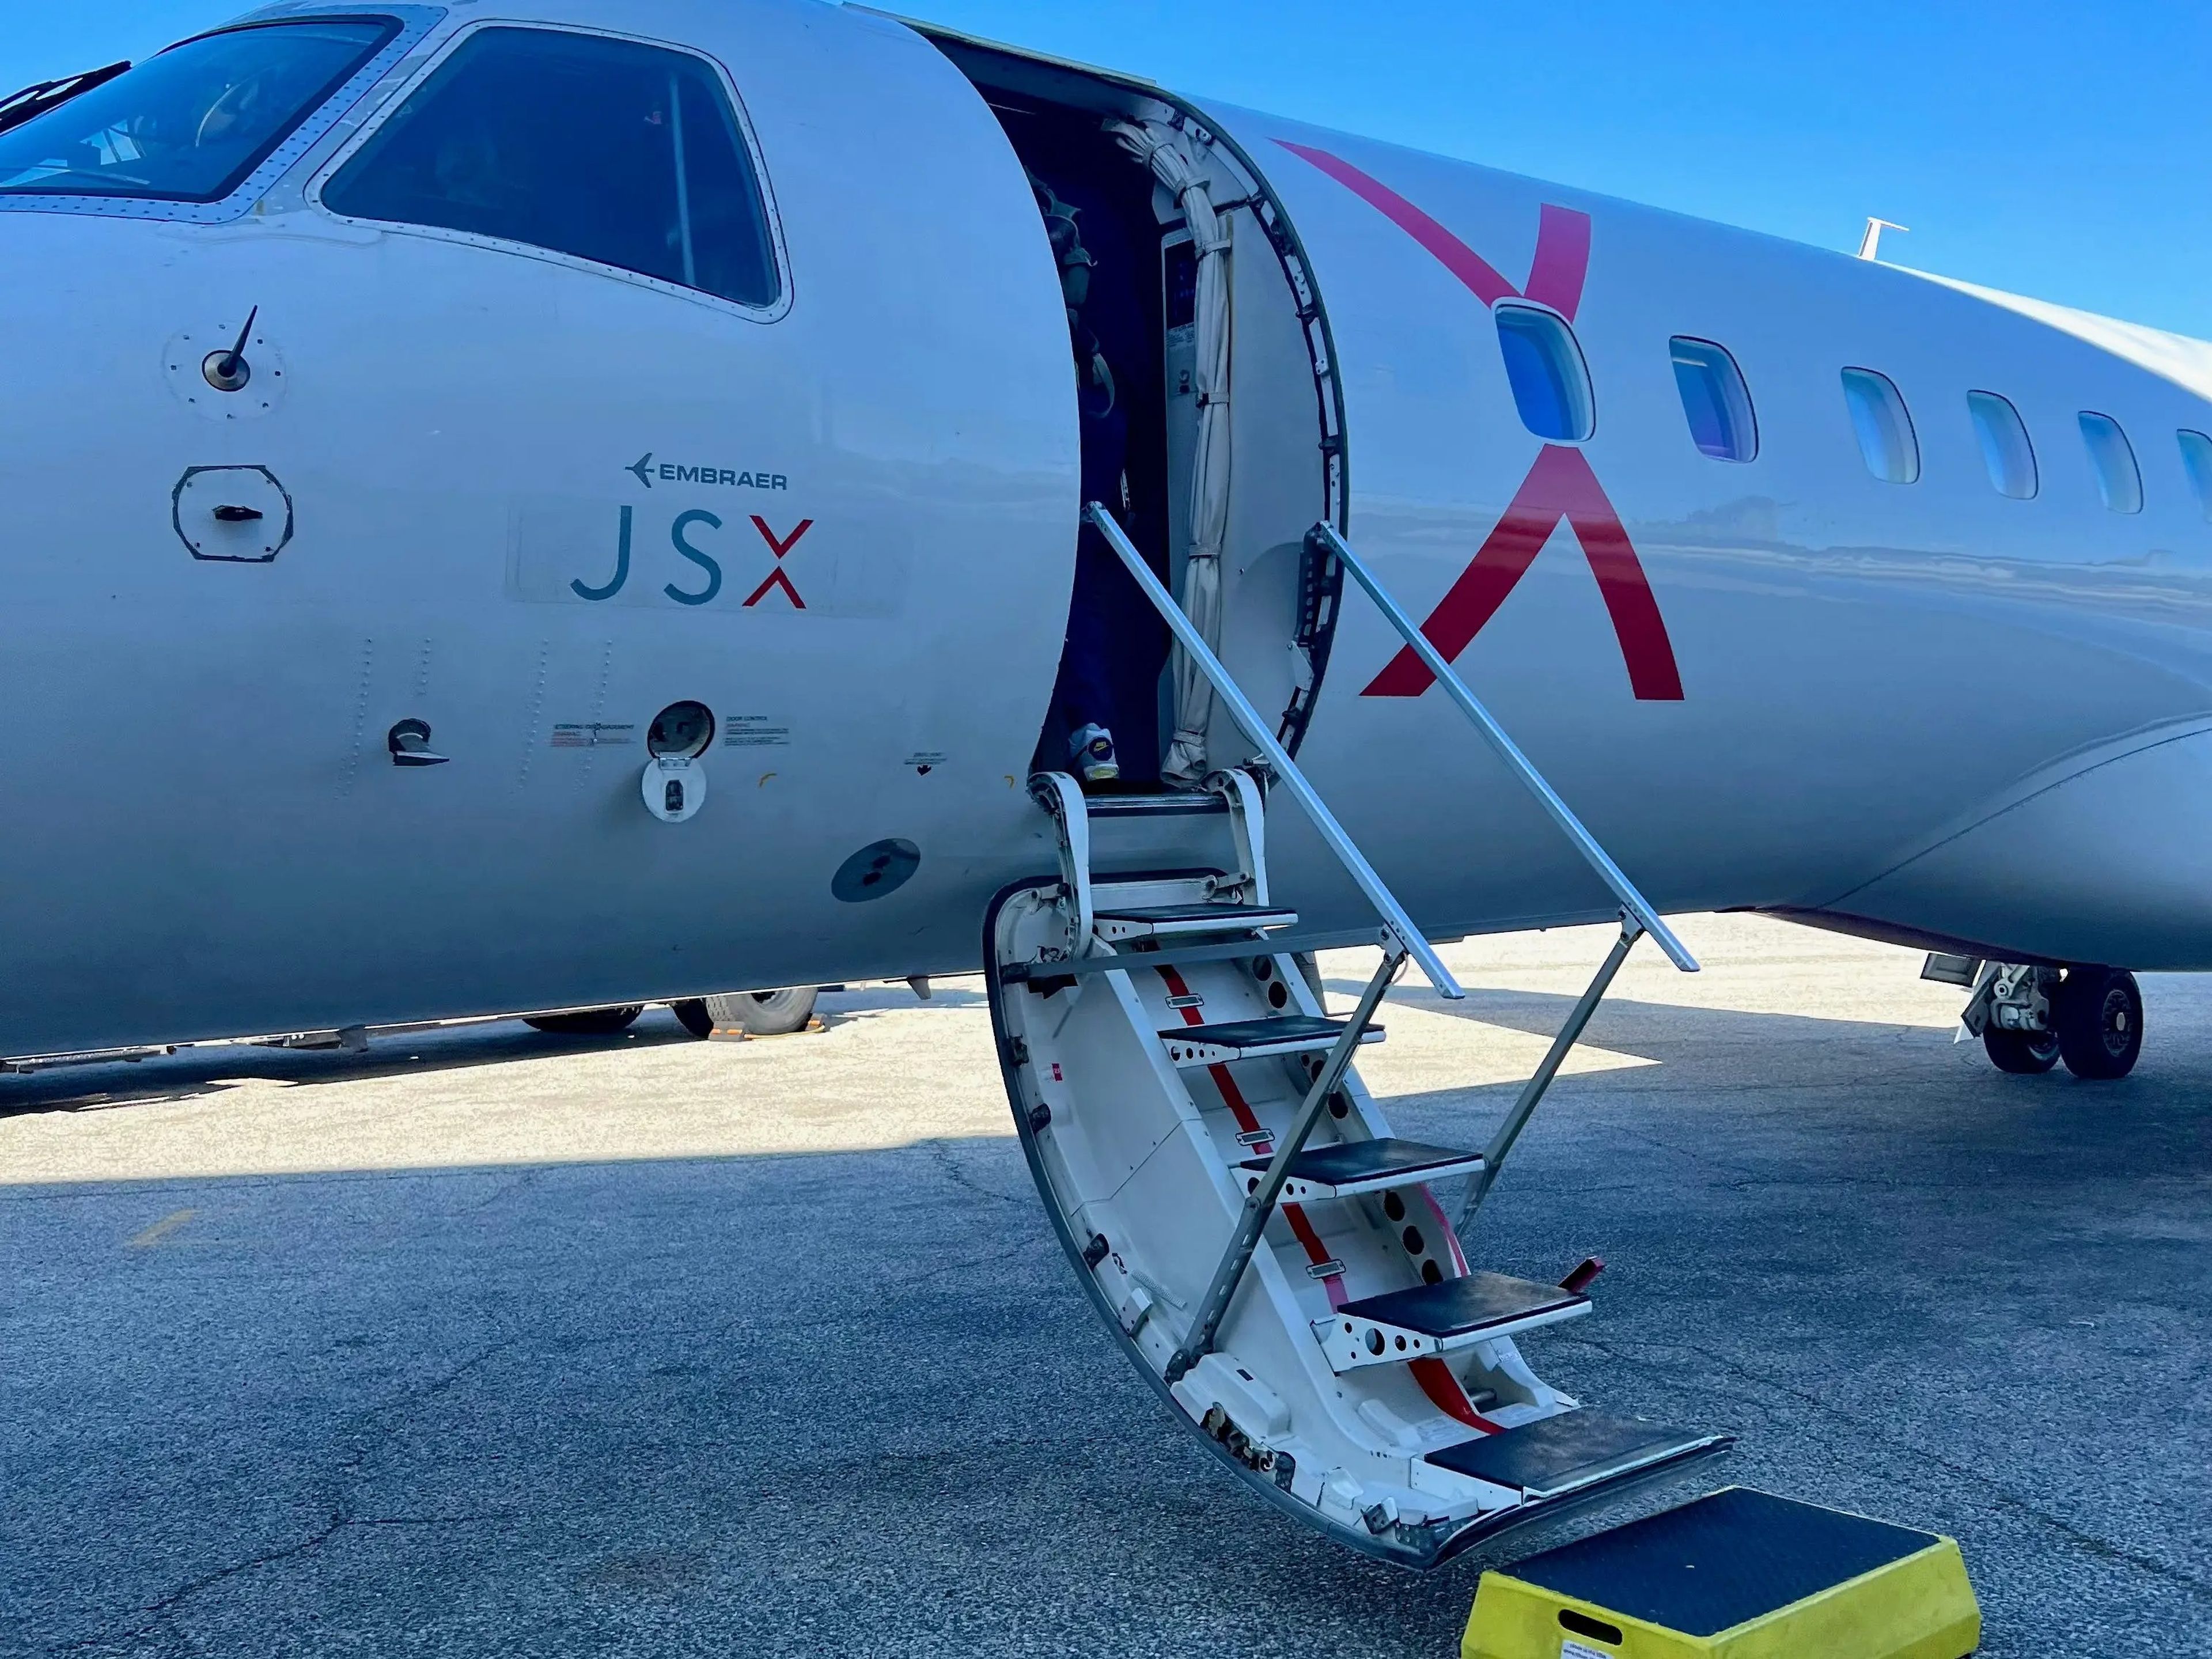 A view of the JSX aircraft with the stairs deployed.